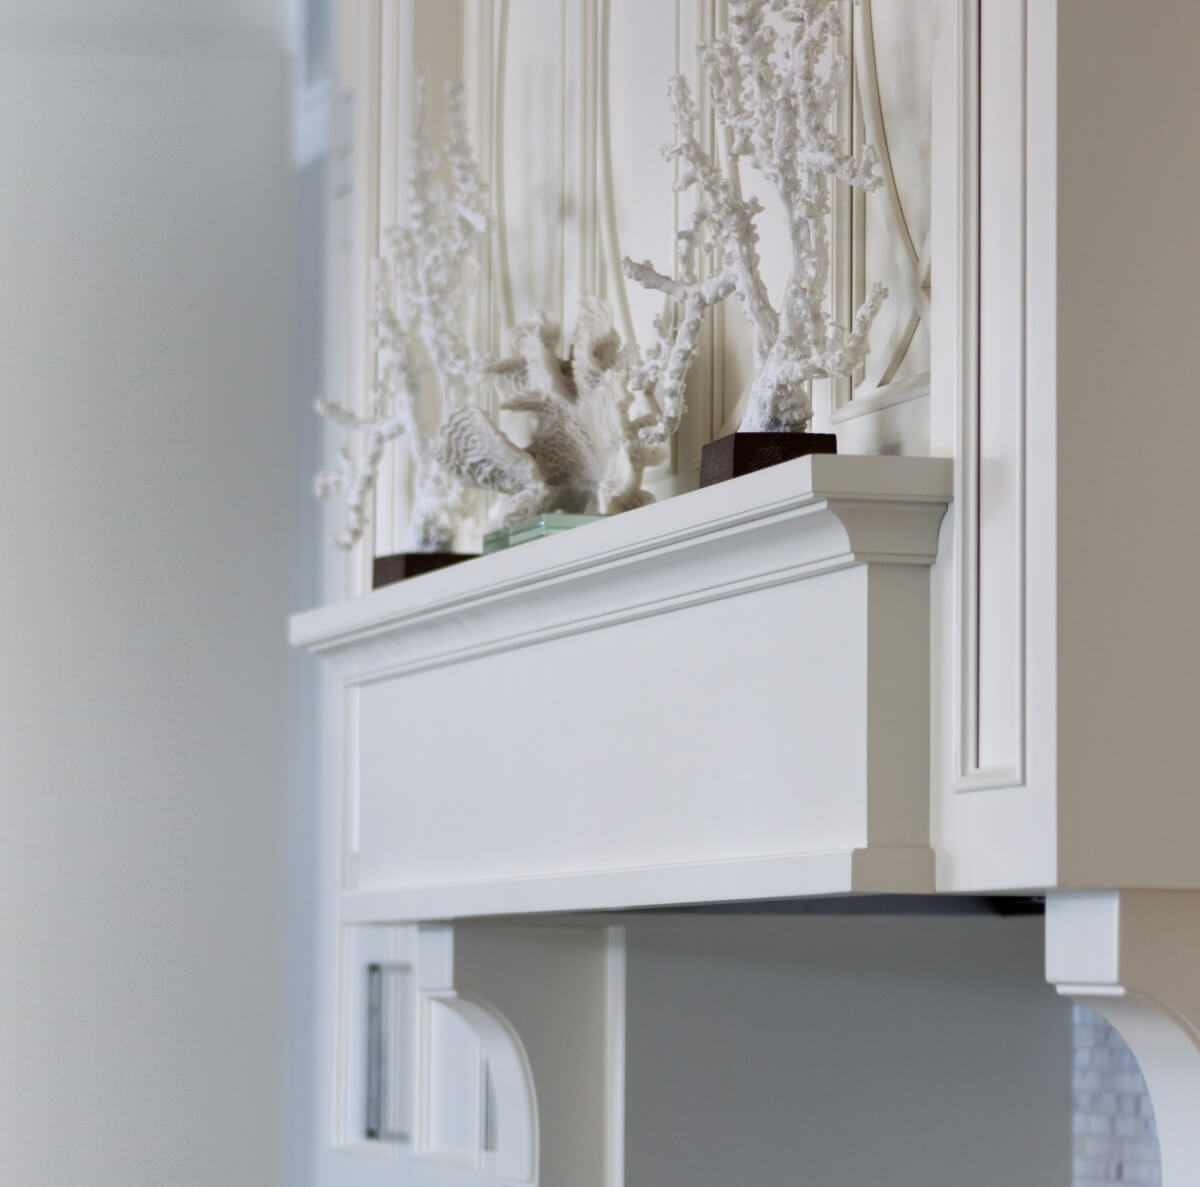 A beautiful wood hood with custom mullion details and a mantel shelf from Dura Supreme Cabinetry.